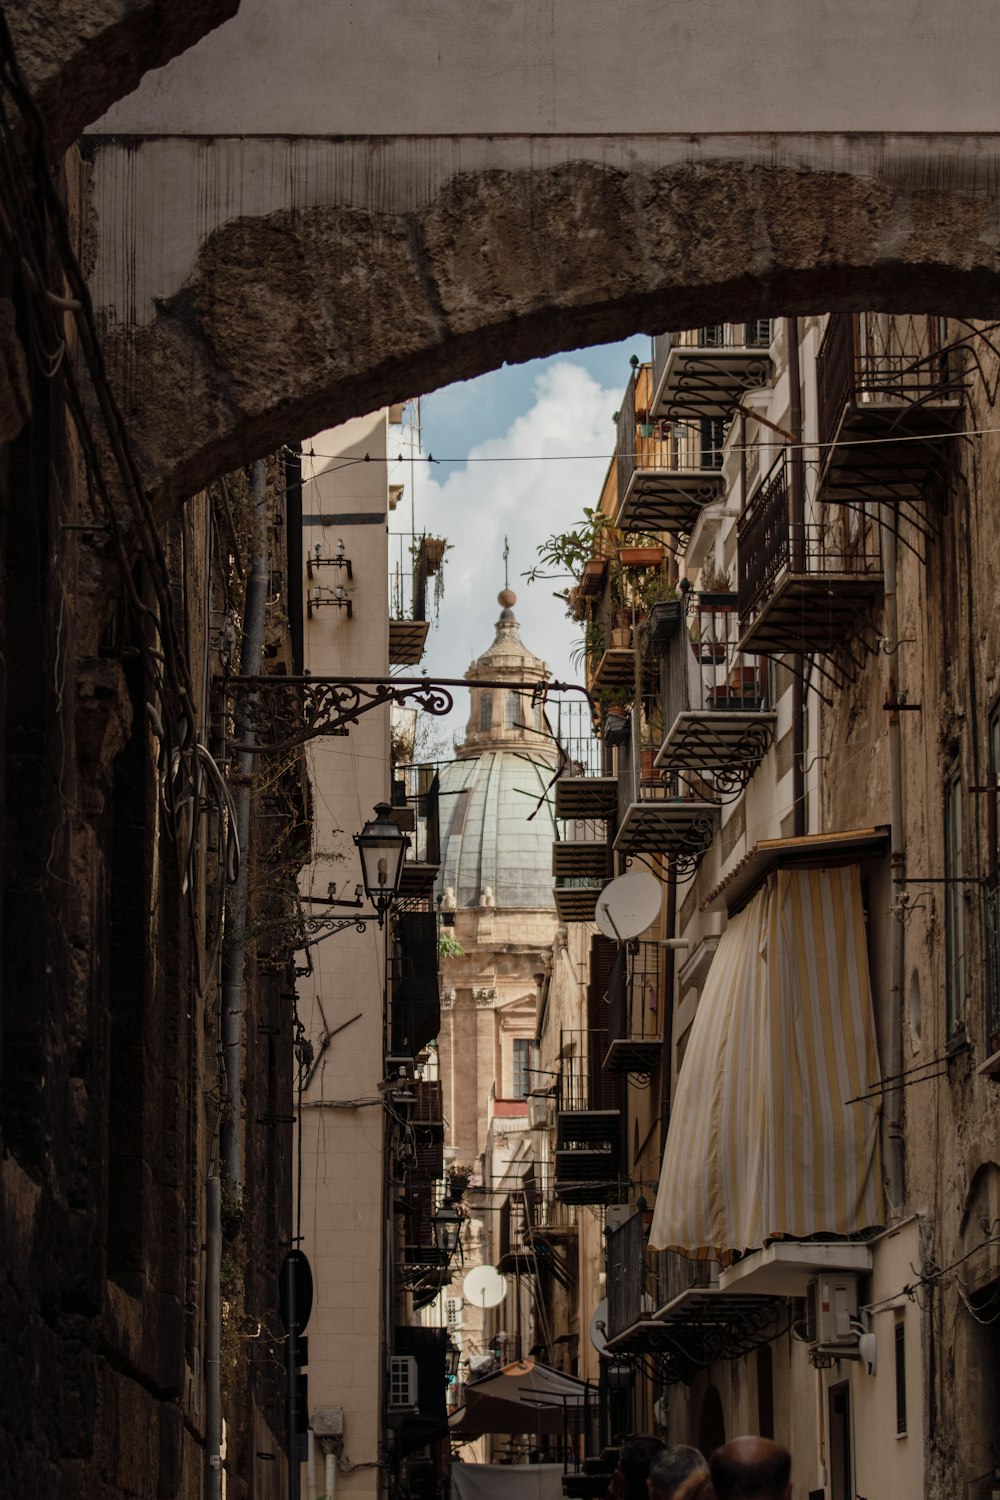 a narrow alleyway with a clock tower in the background